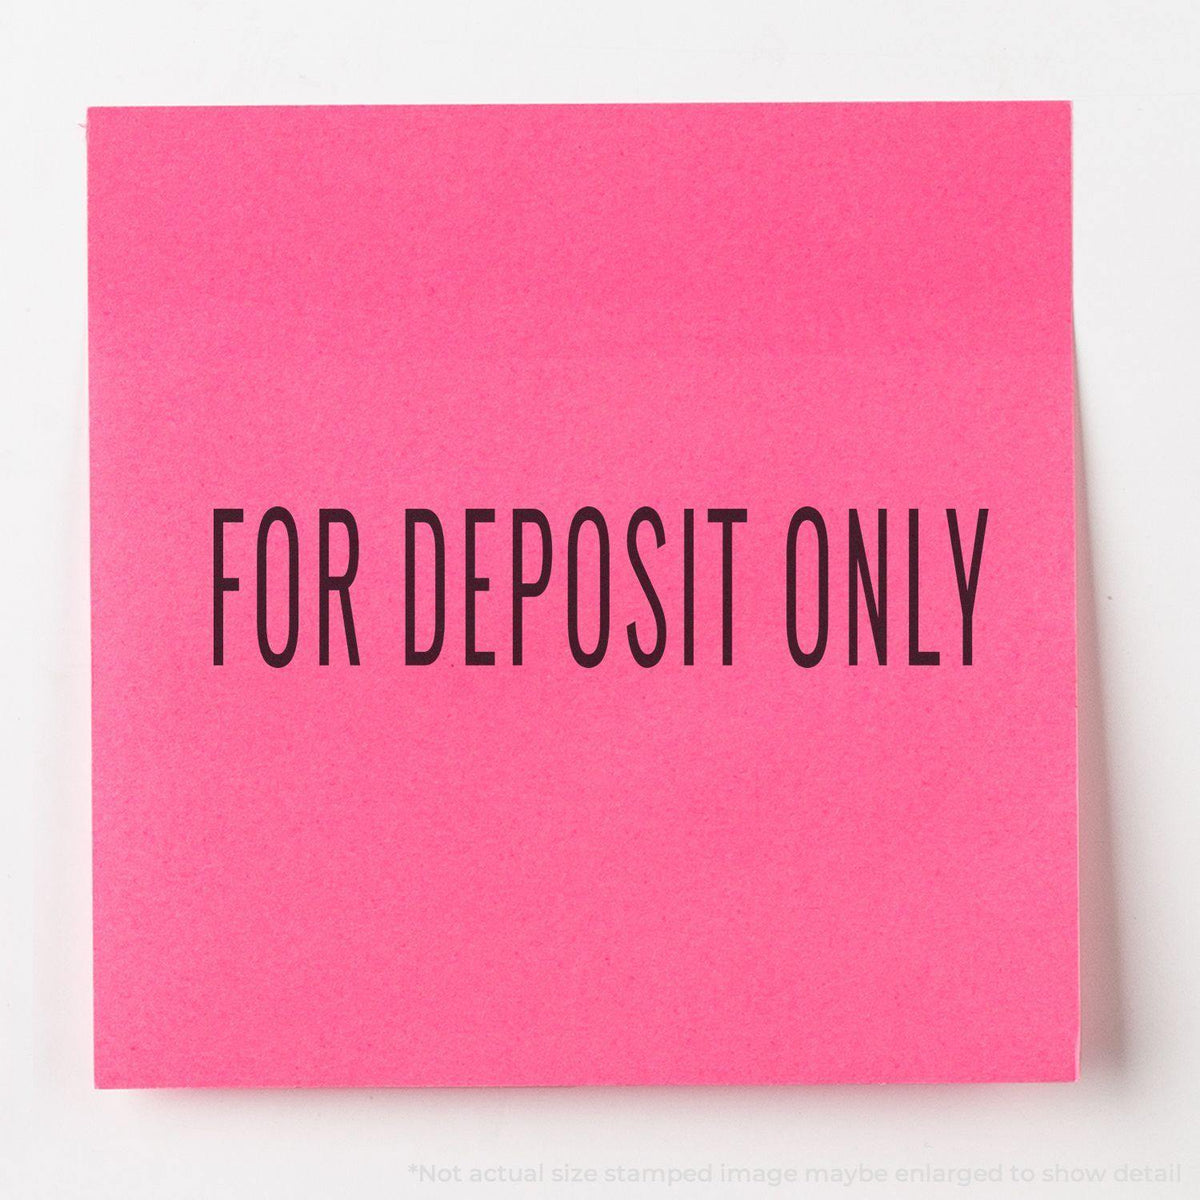 In Use Large Narrow For Deposit Only Rubber Stamp Image